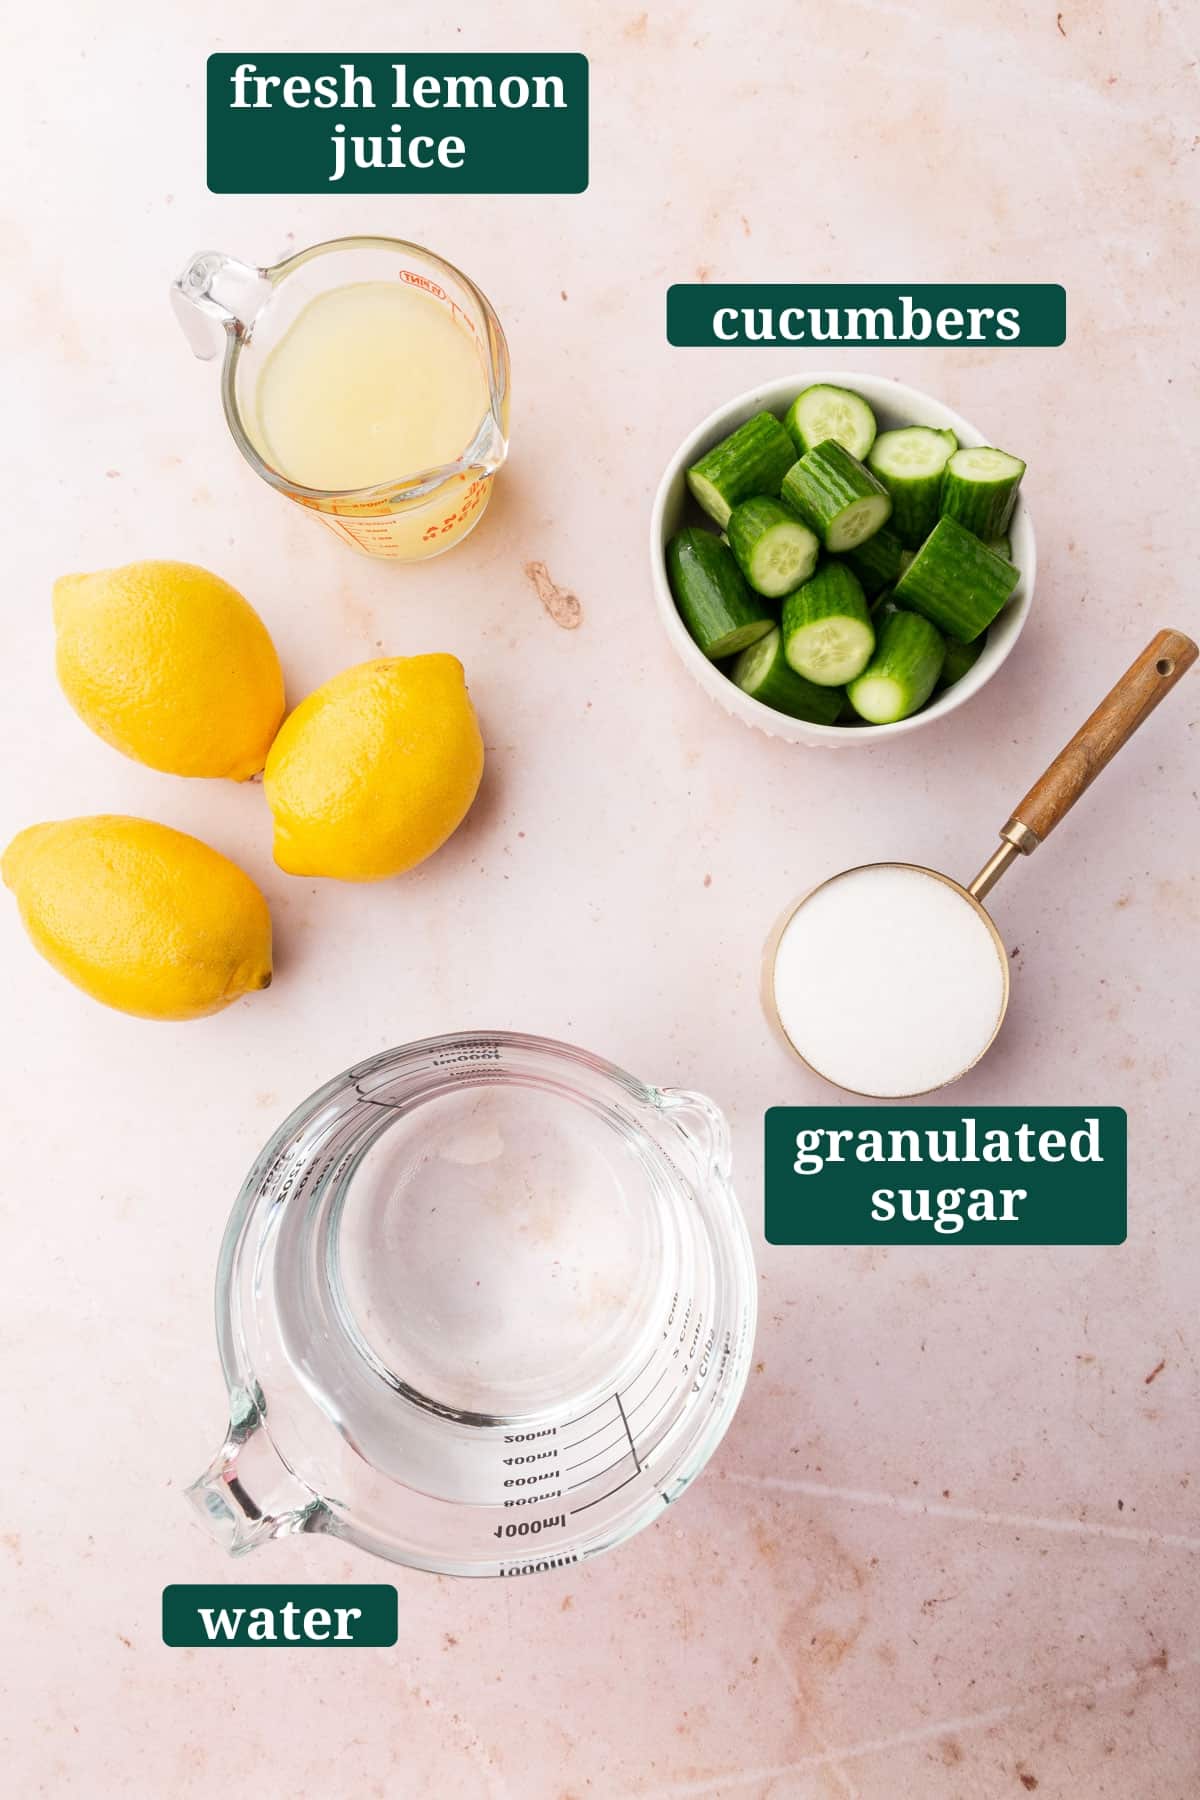 An overhead view of ingredients to make cucumber lemonade including lemon juice, cucumbers, granulated sugar, and water with text overlays over each ingredient.